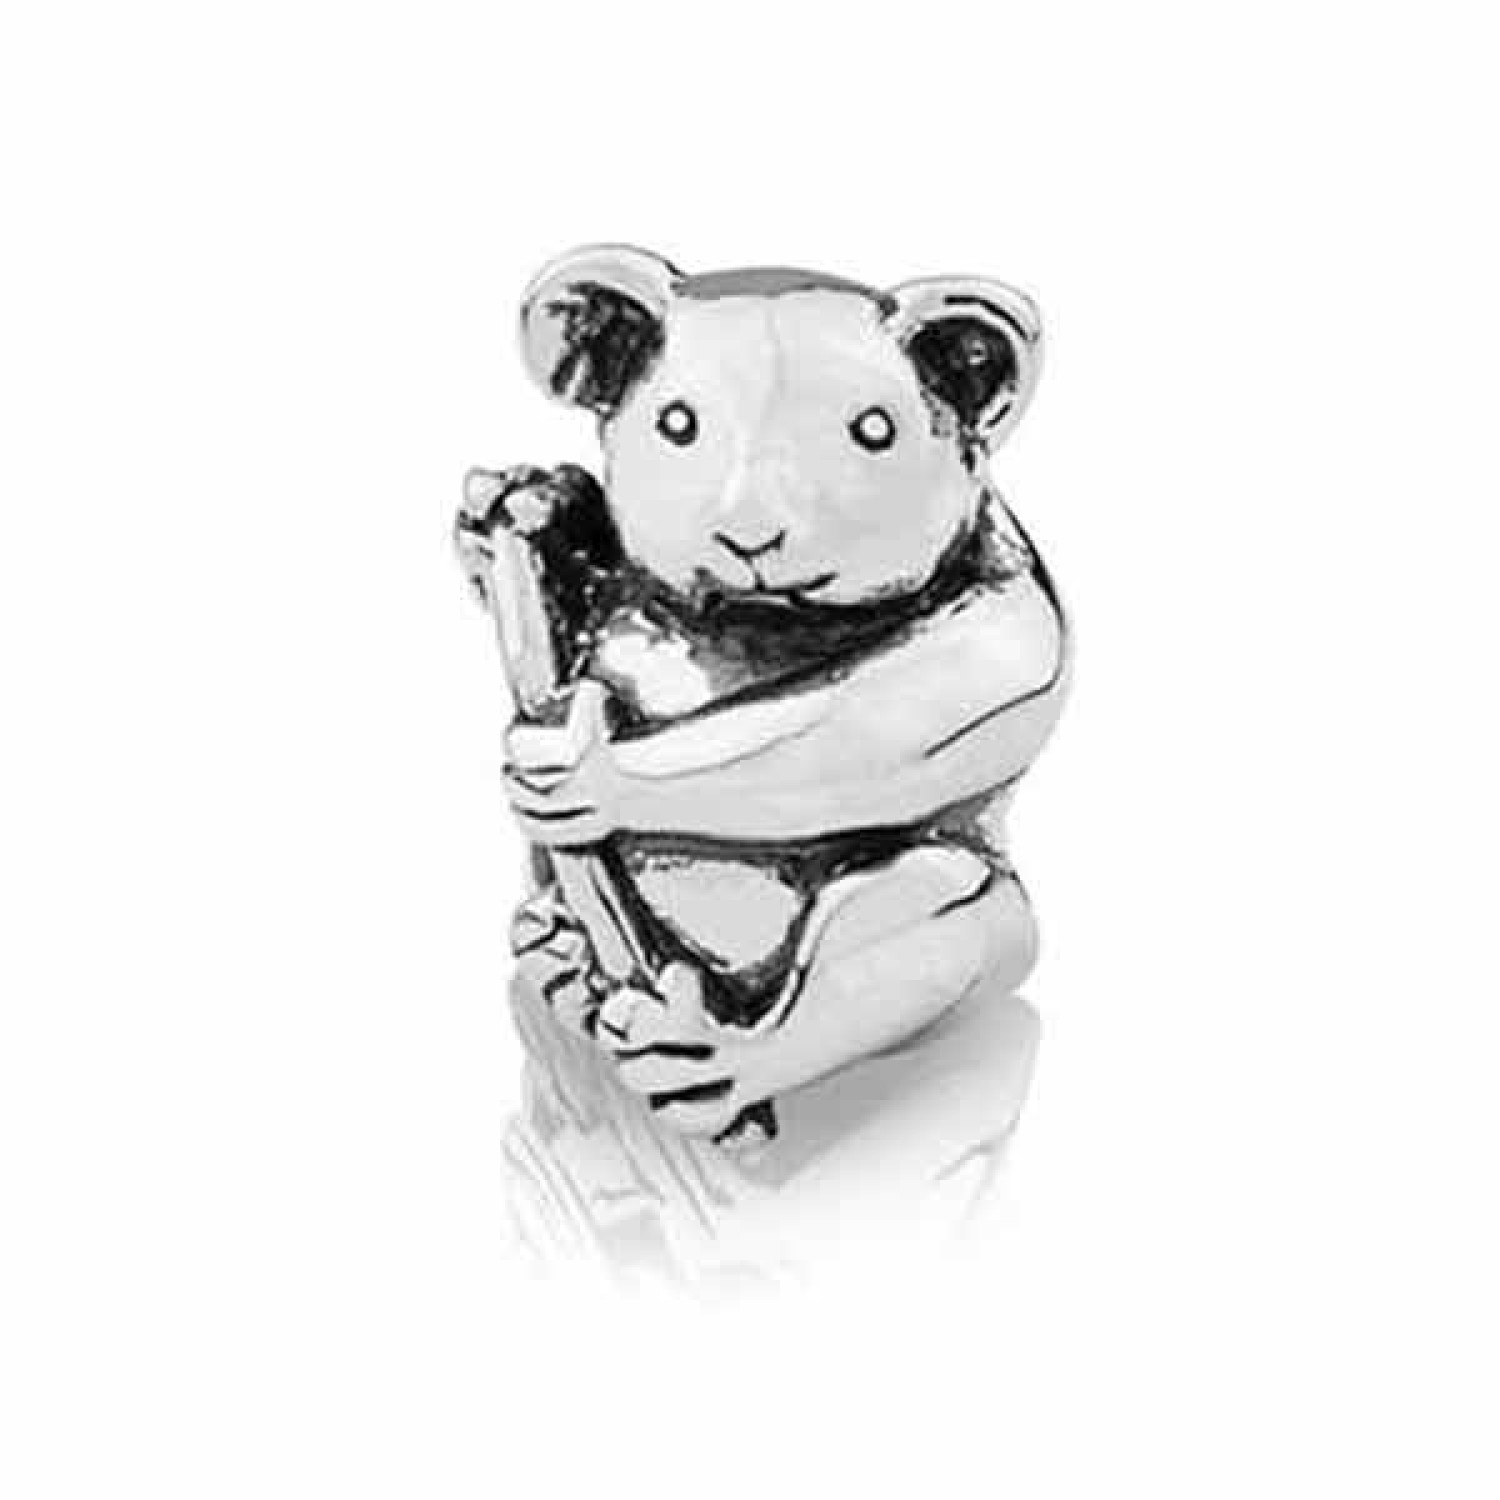 LK181 Evolve Charm Baby Koala. 3 Months No Payments and Interest for Q Card holders.  No two countries are more intertwined than New Zealand and Australia. The cuddly Koala is as iconic as our Kiwi and equally adored. Show your affinity with our @christie